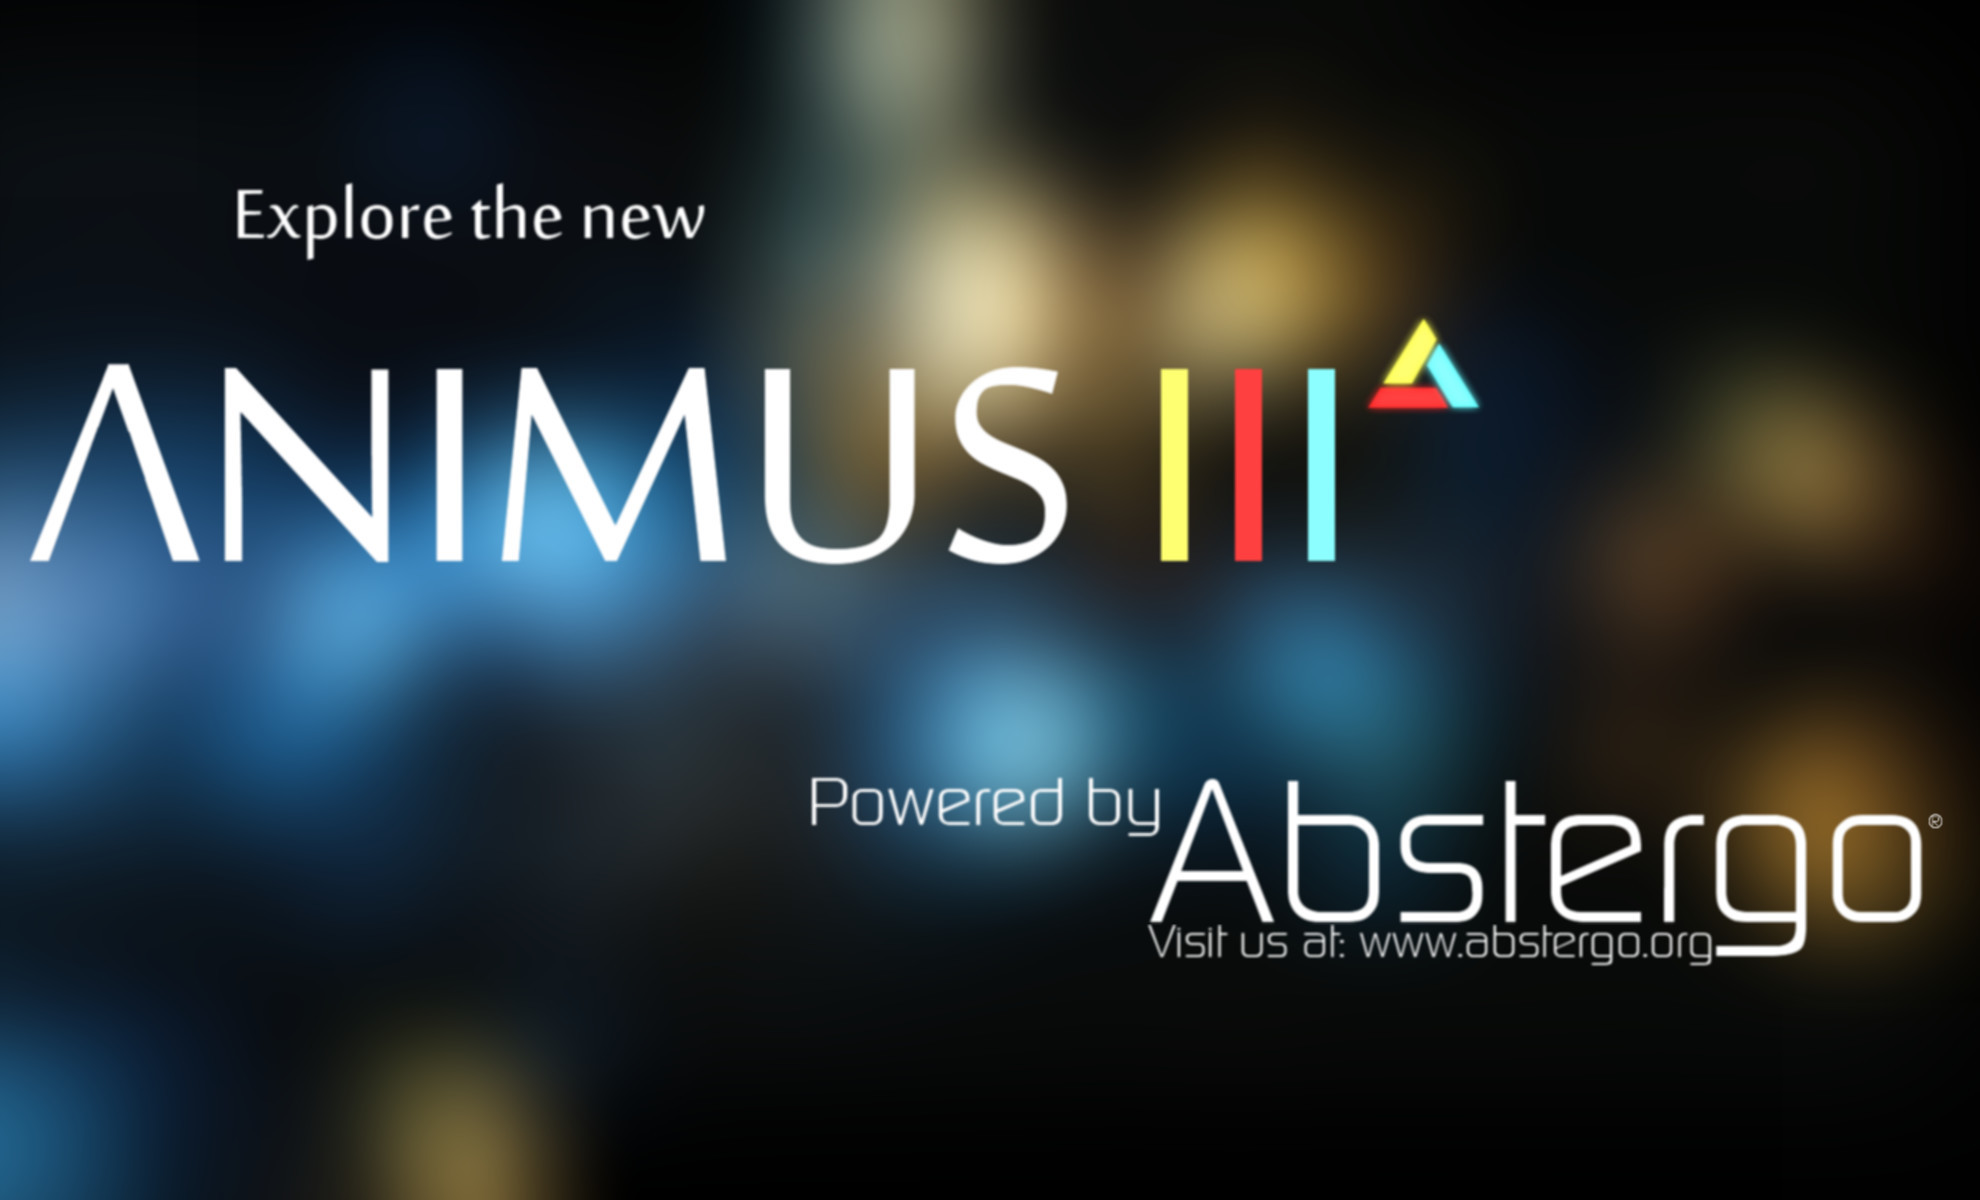 animus live wallpaper,font,text,product,sky,logo